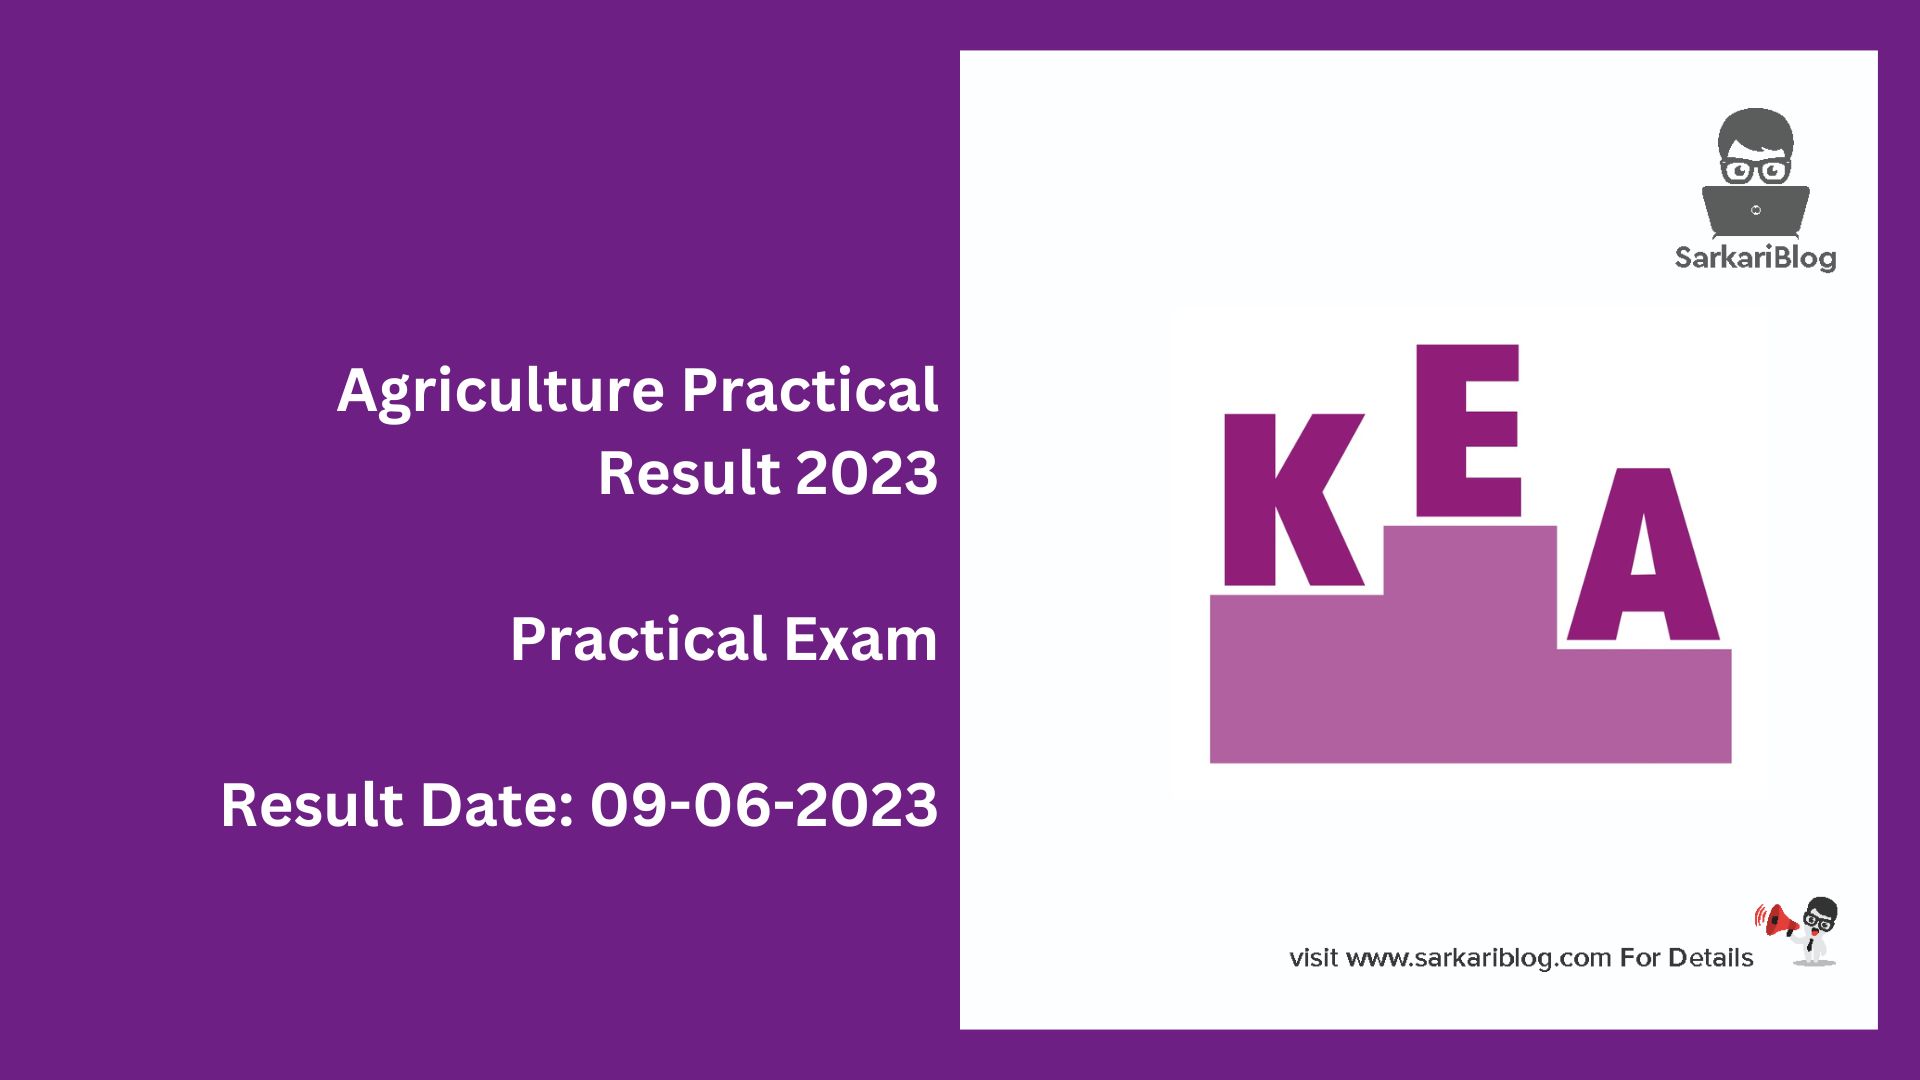 Agriculture Practical Result 2023